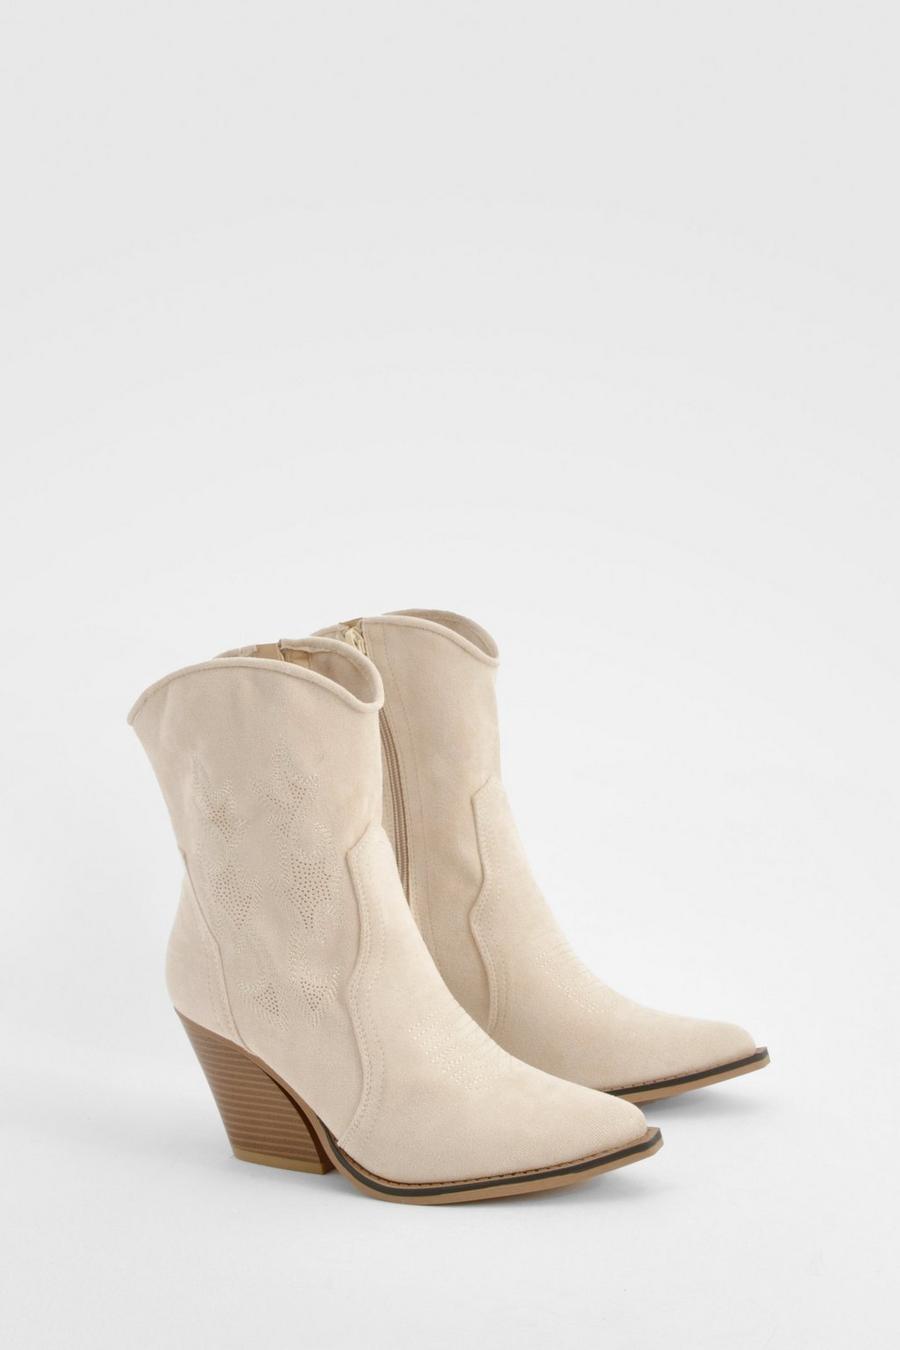 Taupe Embroidered Calf High Western Boots  